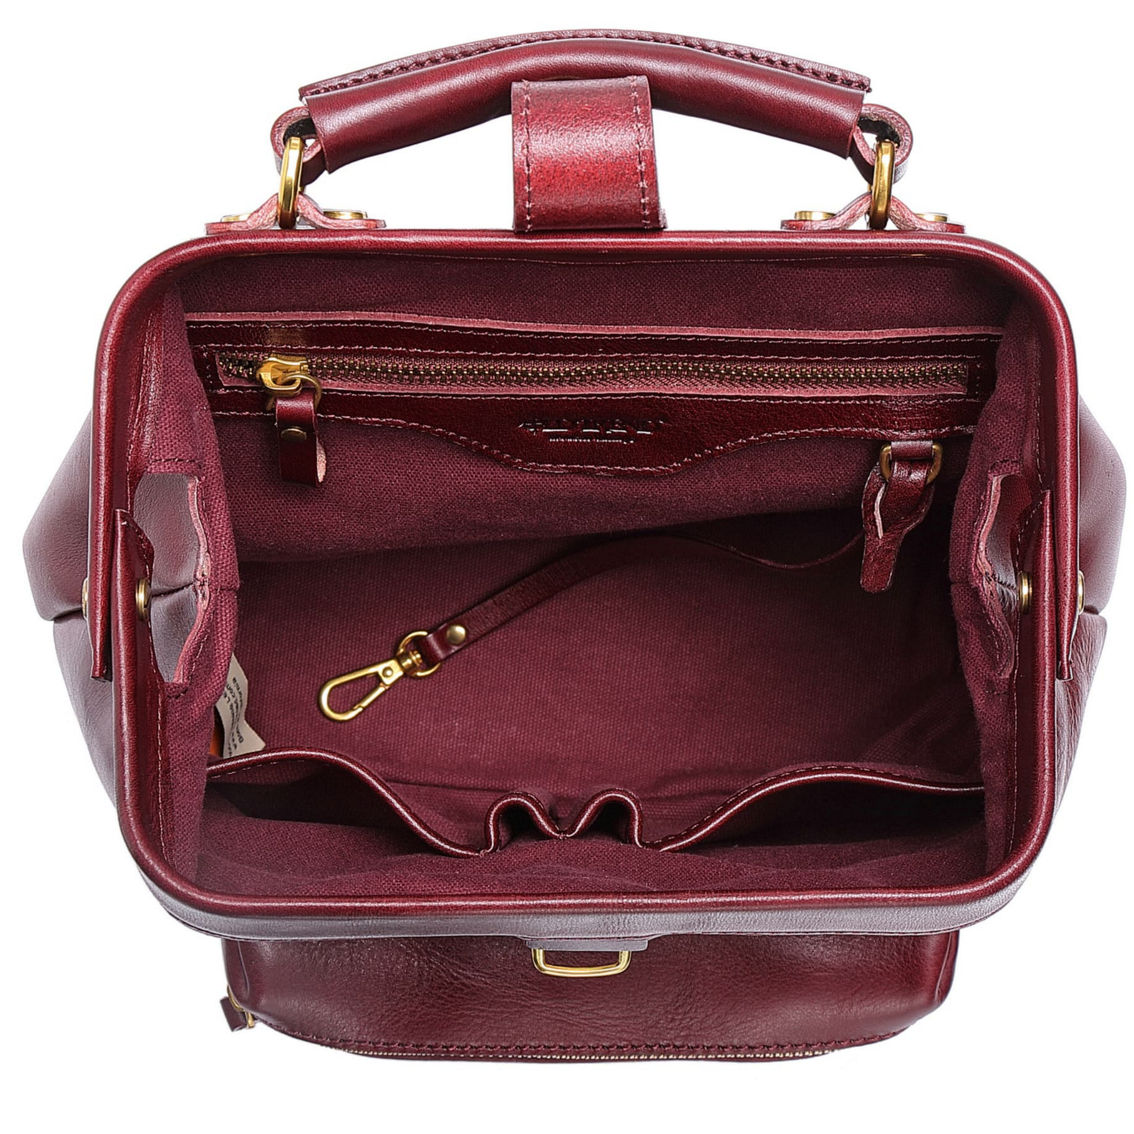 Old Trend Doctor Convertible Leather Backpack - Image 3 of 5